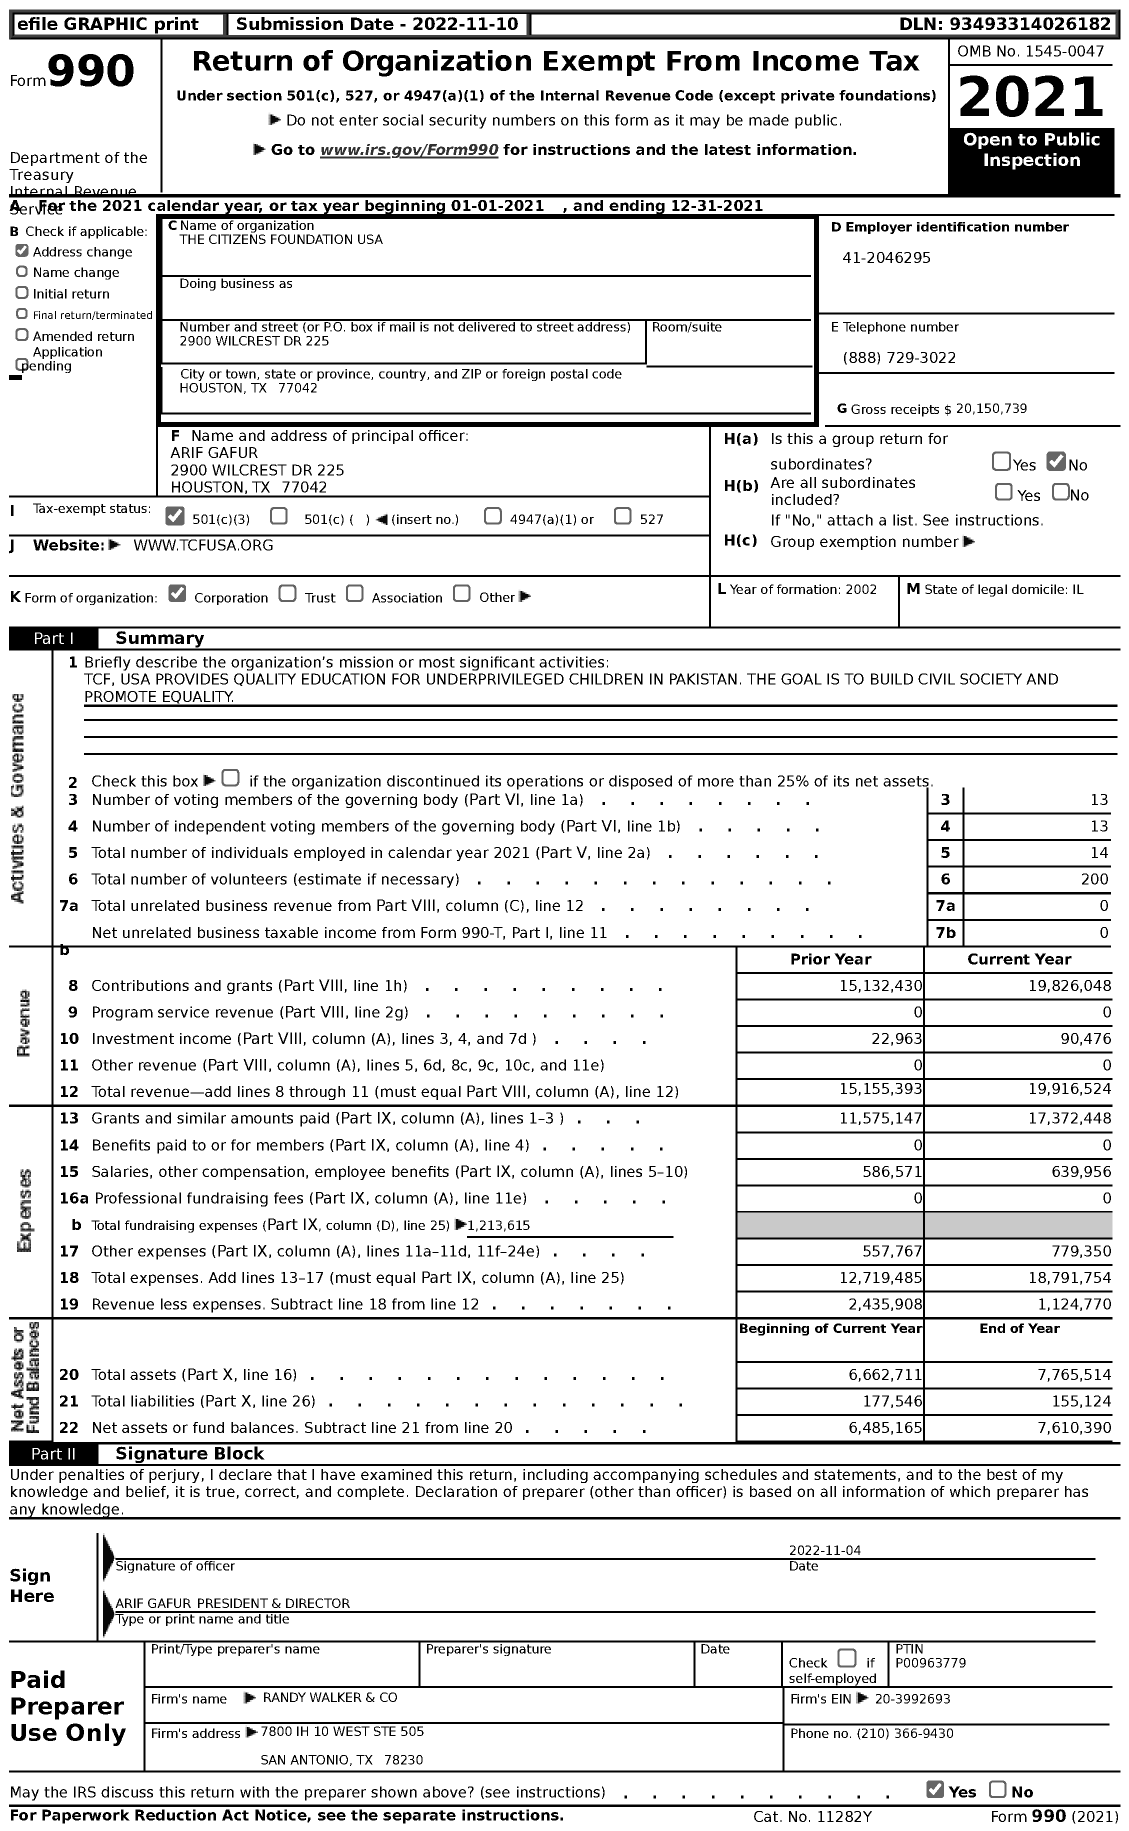 Image of first page of 2021 Form 990 for The Citizens Foundation USA (TCF-USA)